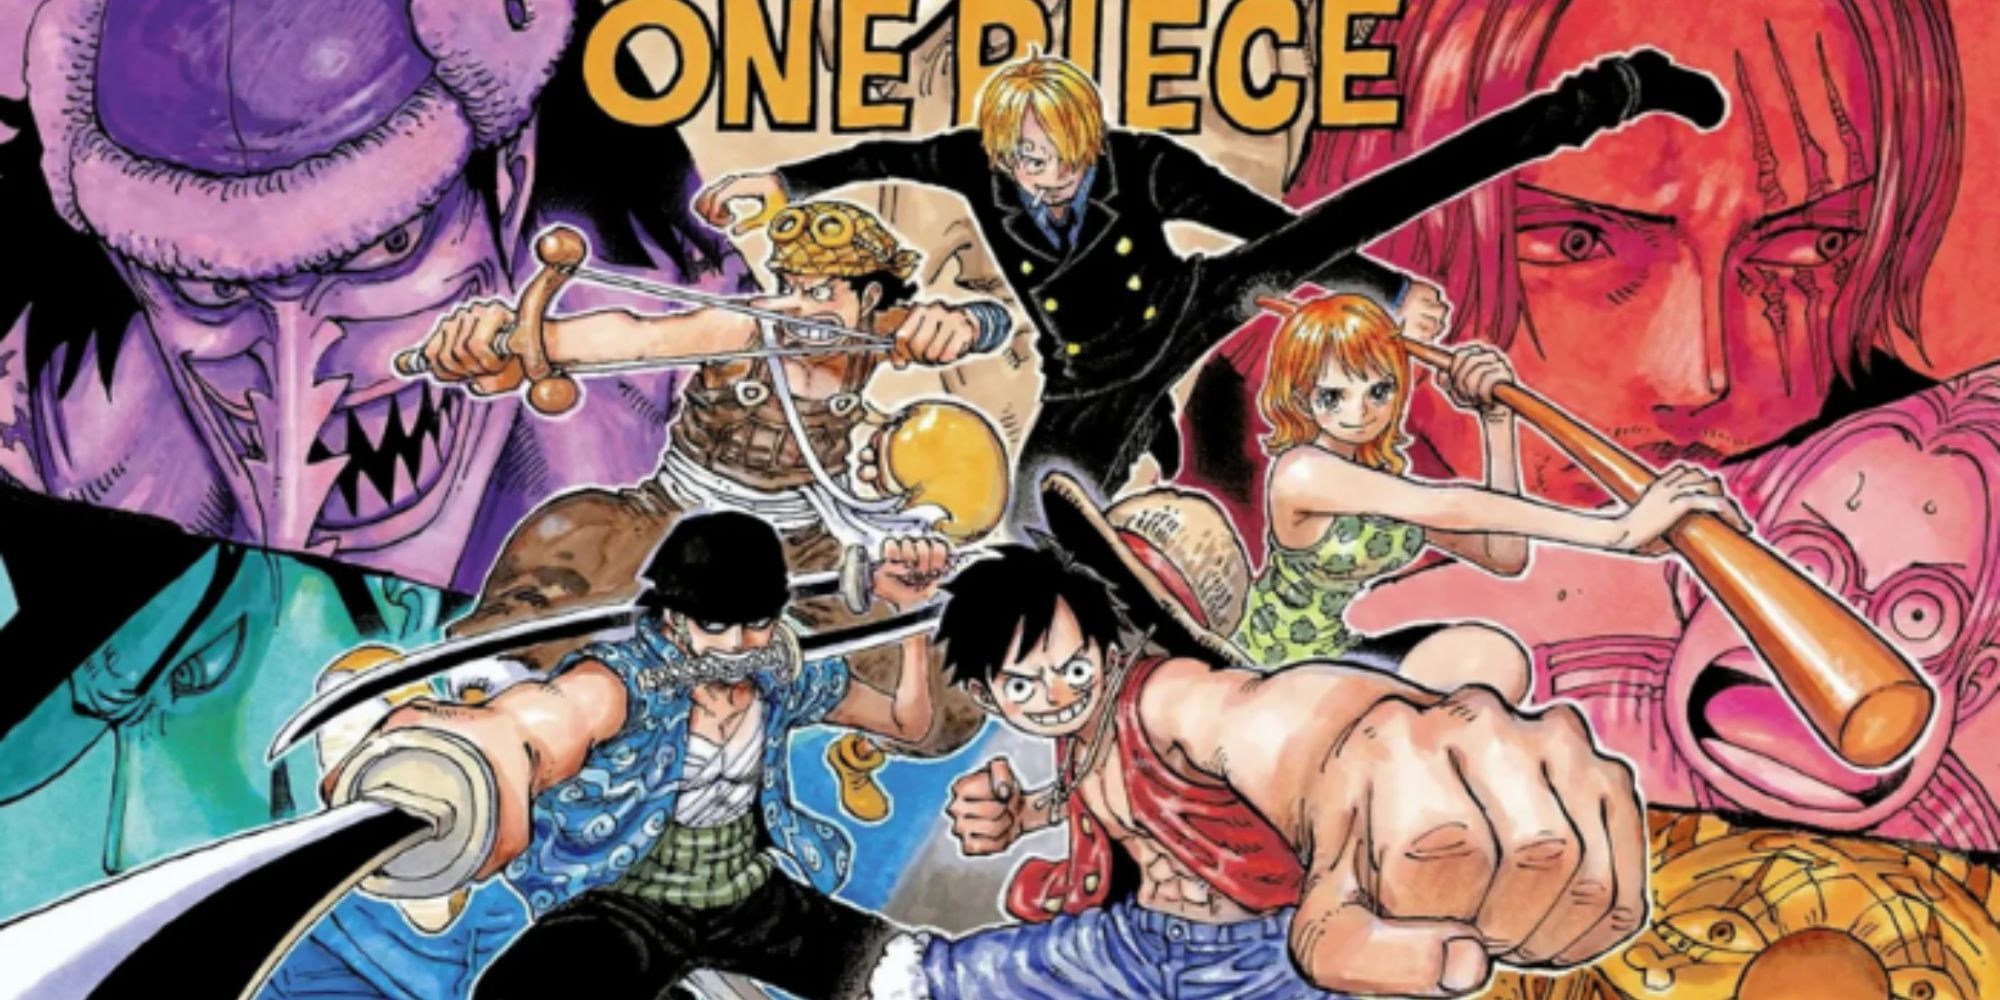 One Piece: Chapter 1090 - Official Release Discussion : r/OnePiece